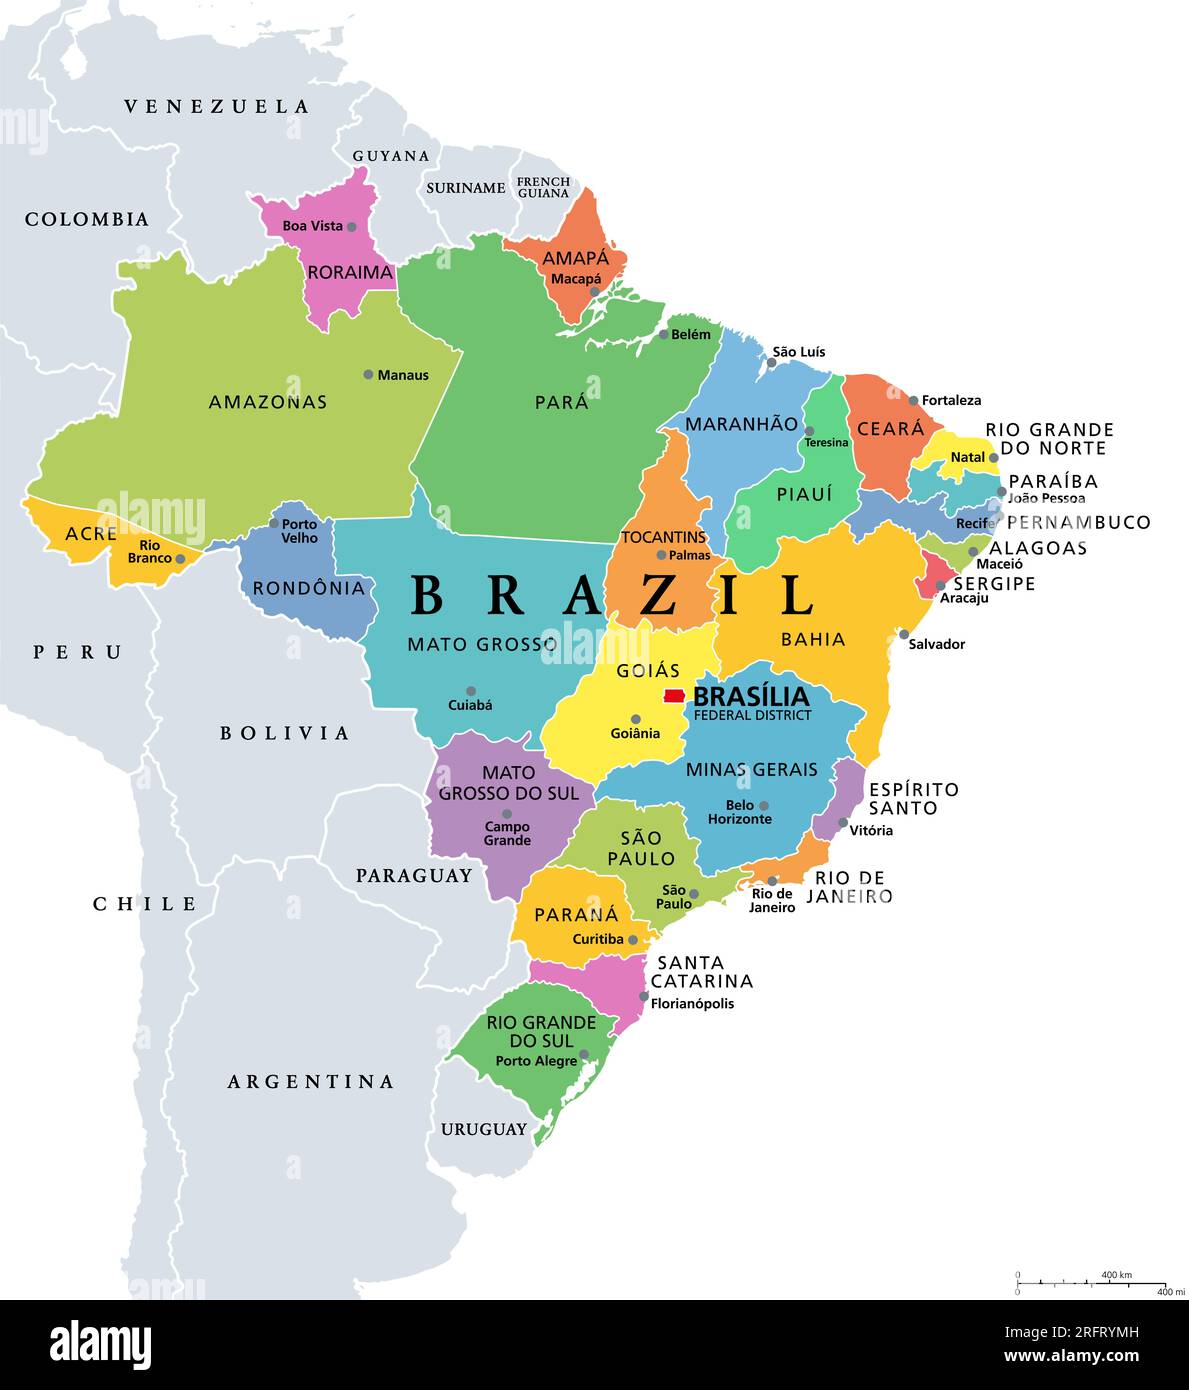 States of Brazil, political map. Colored federative units, with borders and capitals. Subnational entities forming the Federative Republic of Brazil. Stock Photo